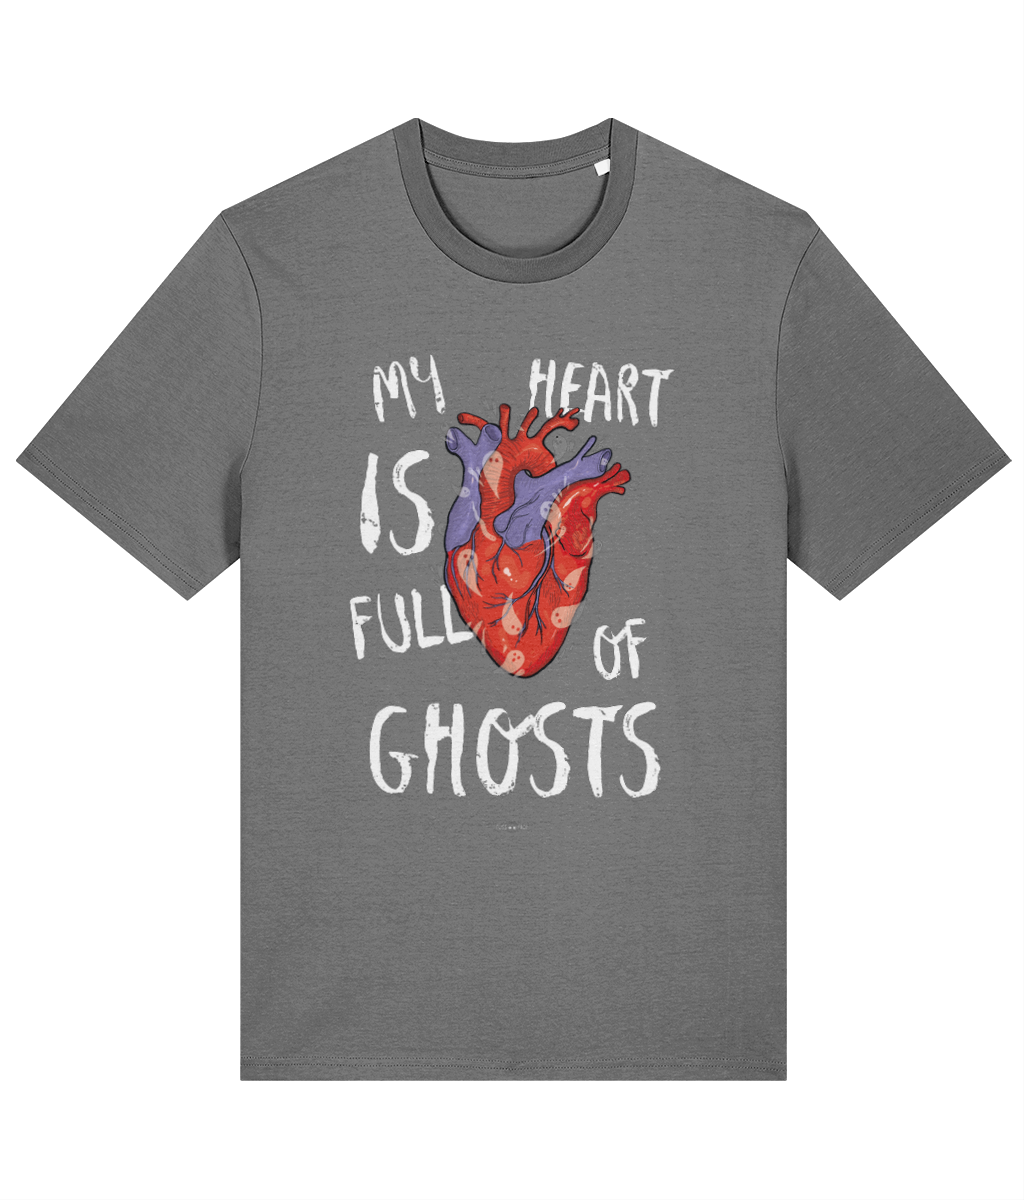 My Heart Is Full Of Ghosts - Unisex Tussface T-shirt